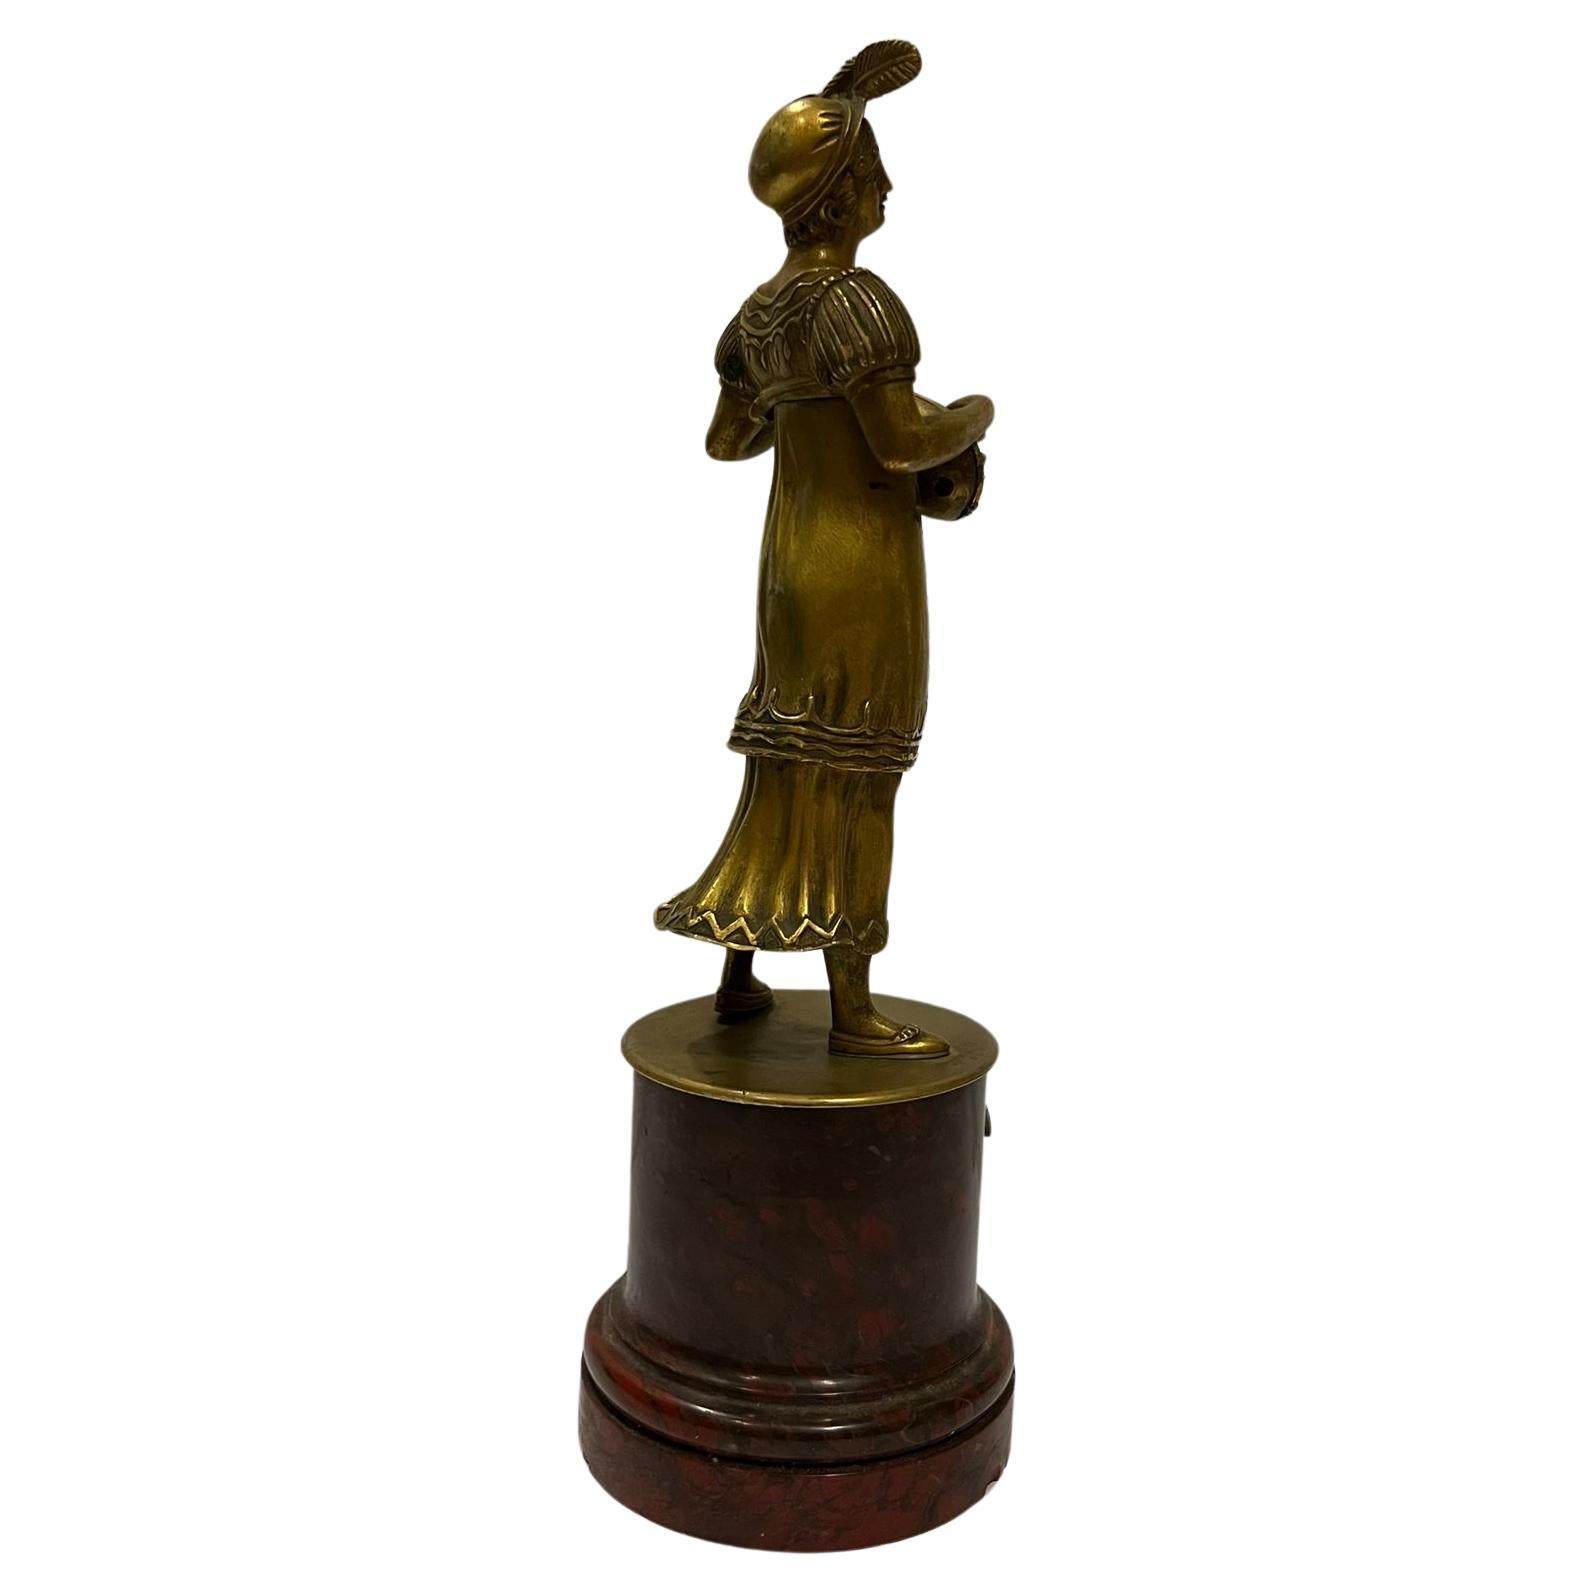 Antique sculpture of an elegant lady with mandolin made of bronze/brass in good original condition, ca. 1880, the base is slightly damaged see photo 